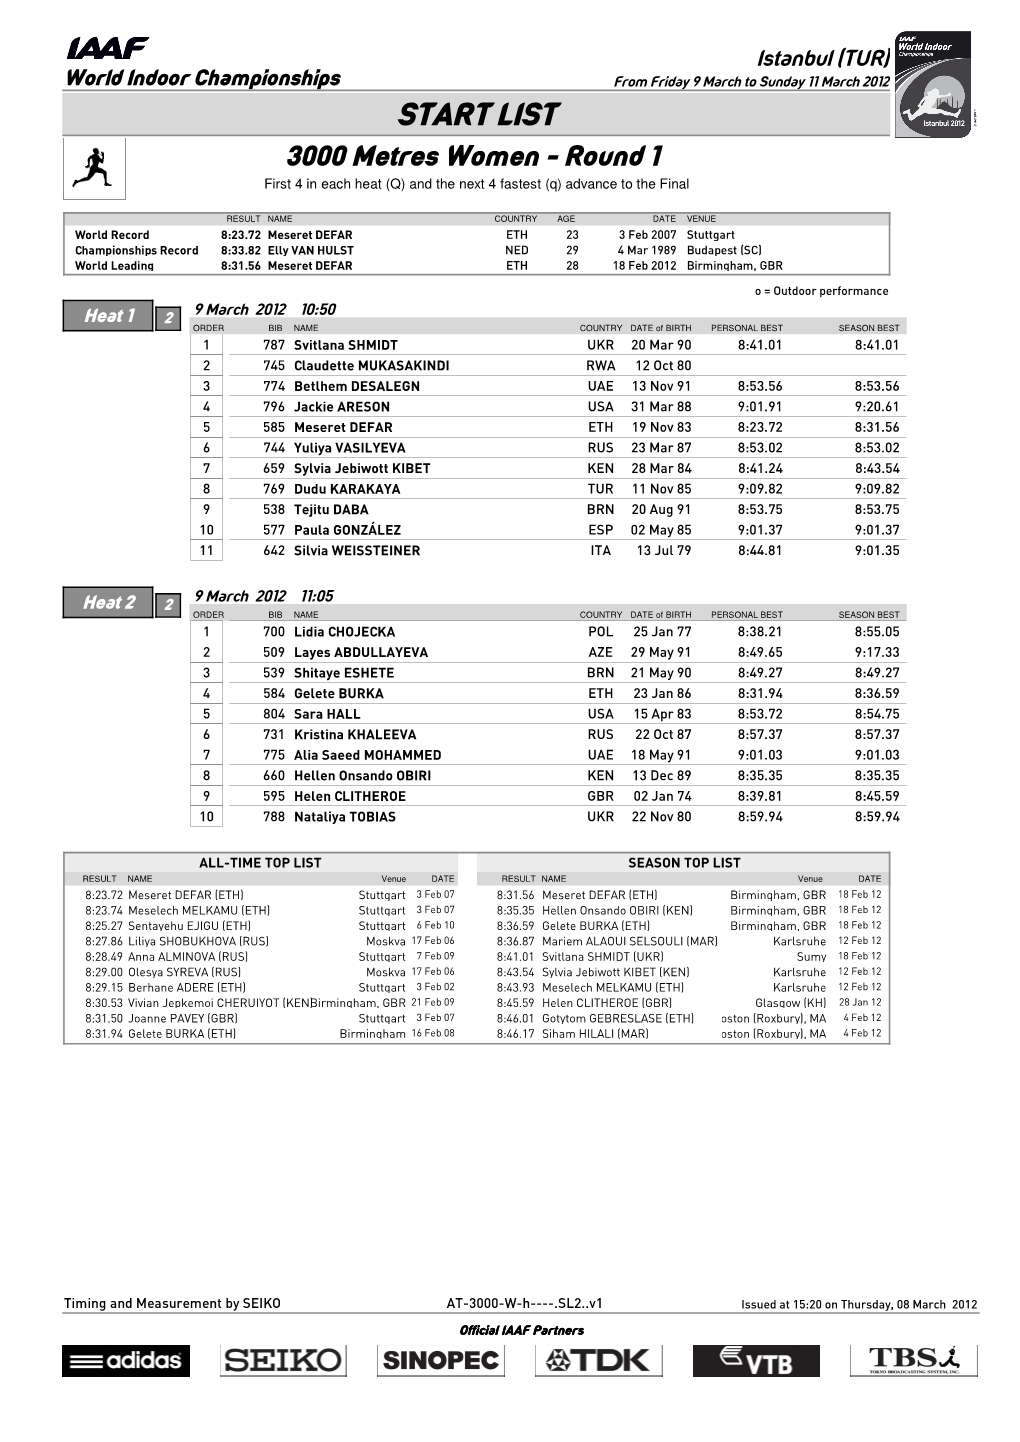 START LIST 3000 Metres Women - Round 1 First 4 in Each Heat (Q) and the Next 4 Fastest (Q) Advance to the Final